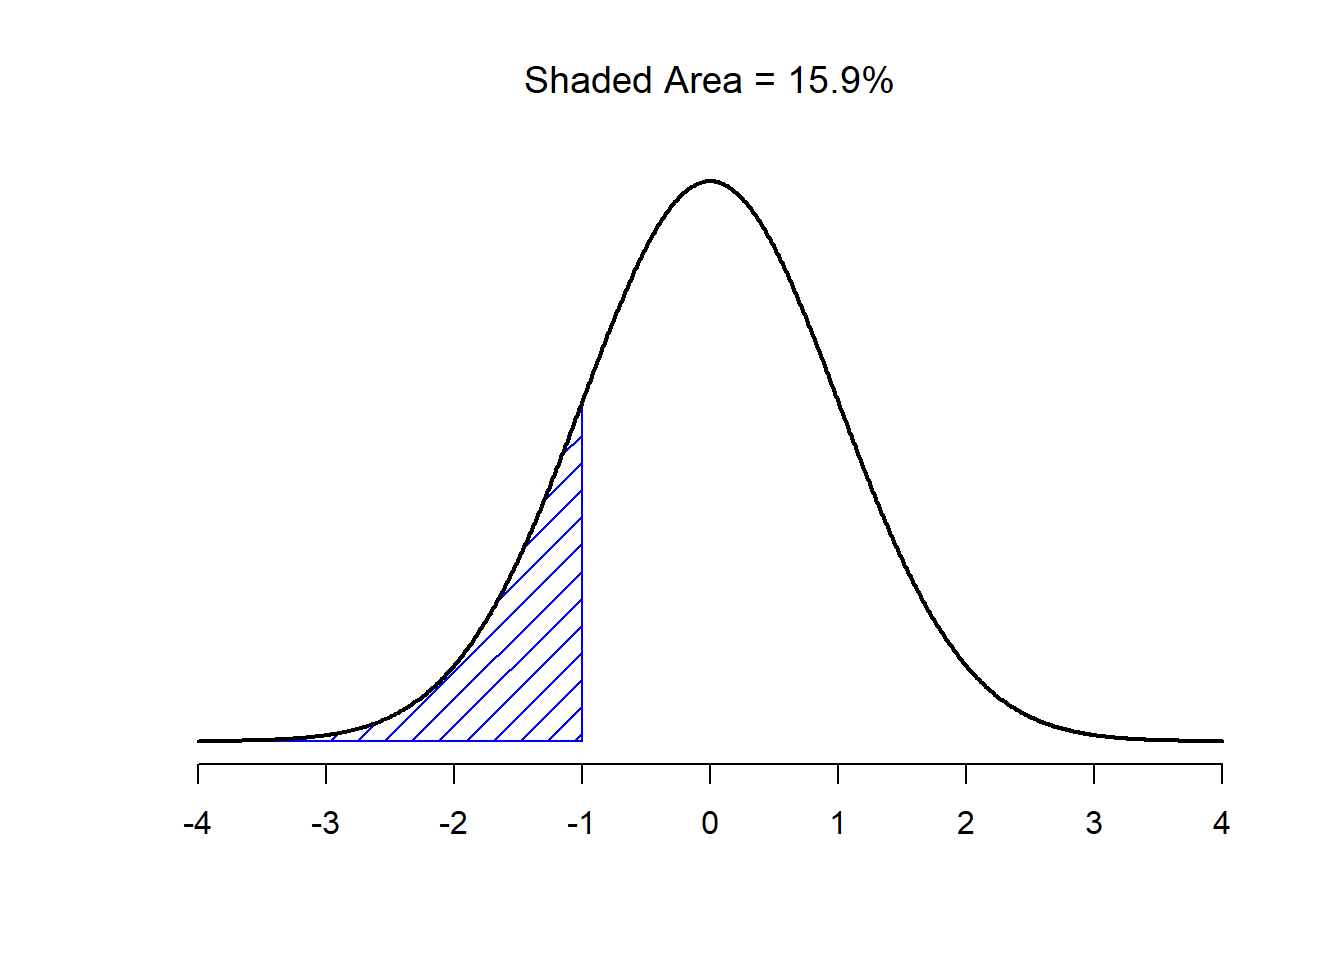 Two more examples of the "area under the curve idea". There is a 15.9% chance that an observation is one standard deviation below the mean or smaller